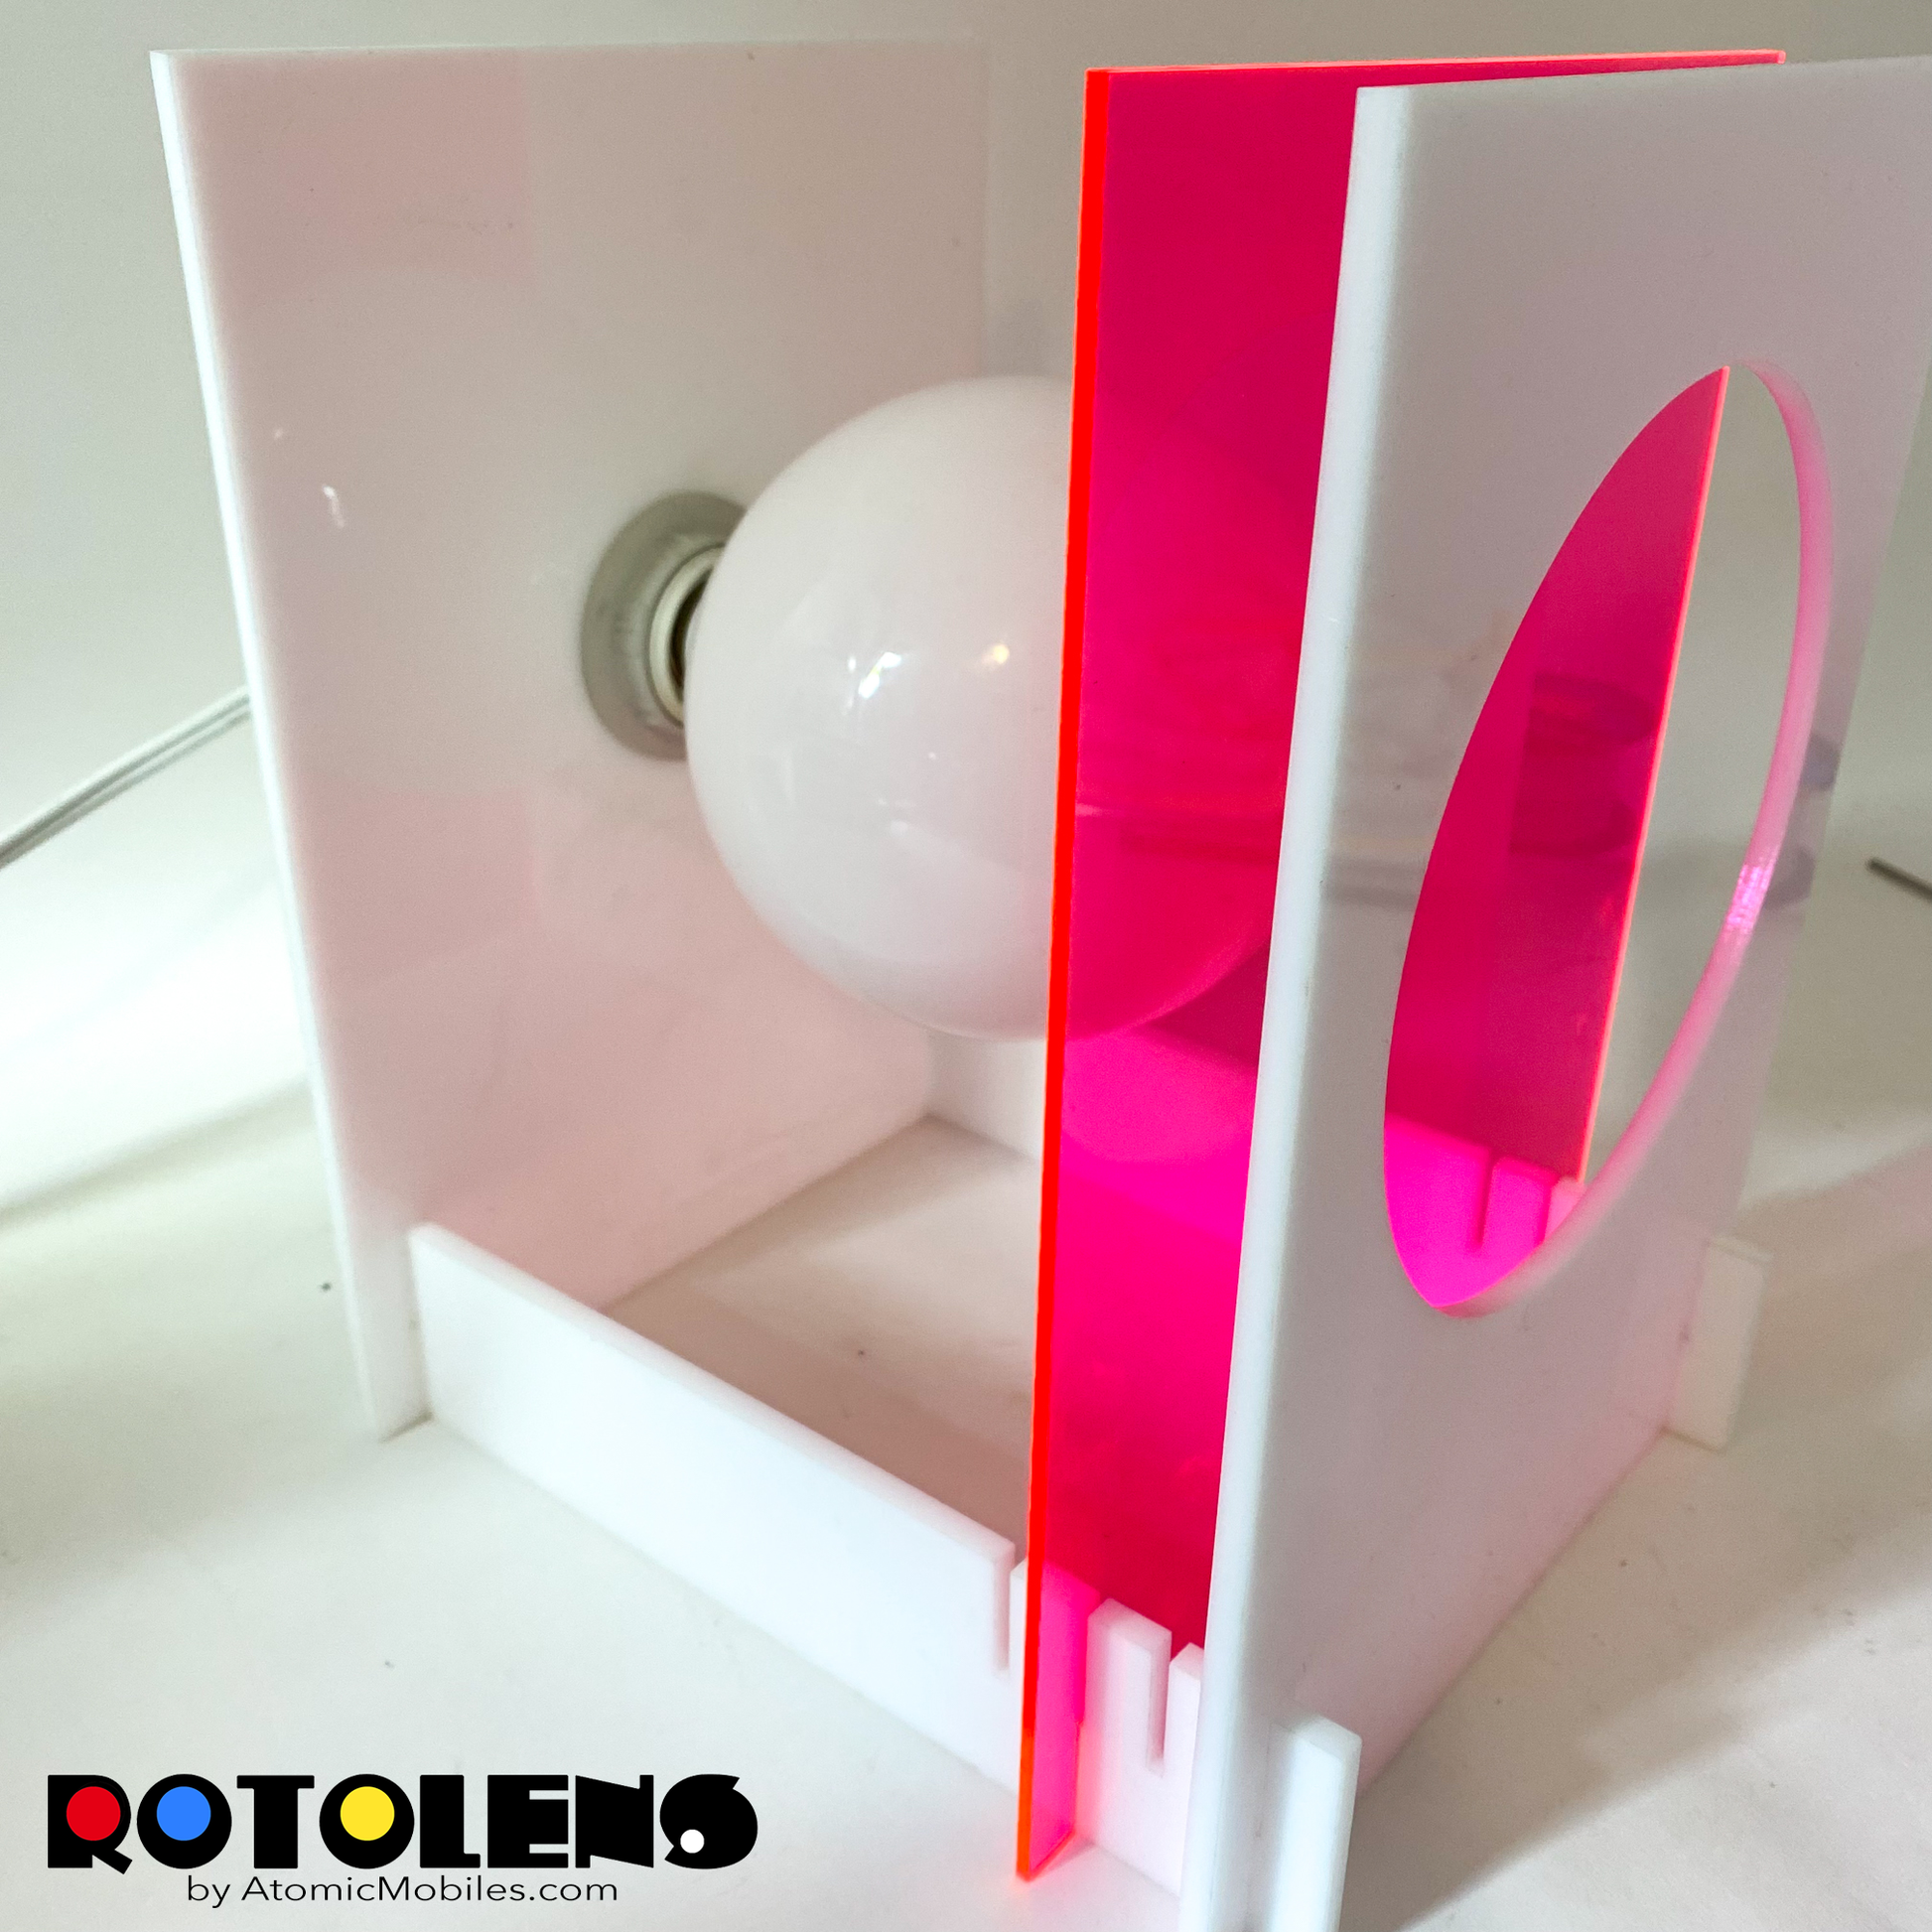 Side view of ROTOLENS Space Age Lamp with interchangeable clear plexiglass lens in Fluorescent Hot Pink by AtomicMobiles.com